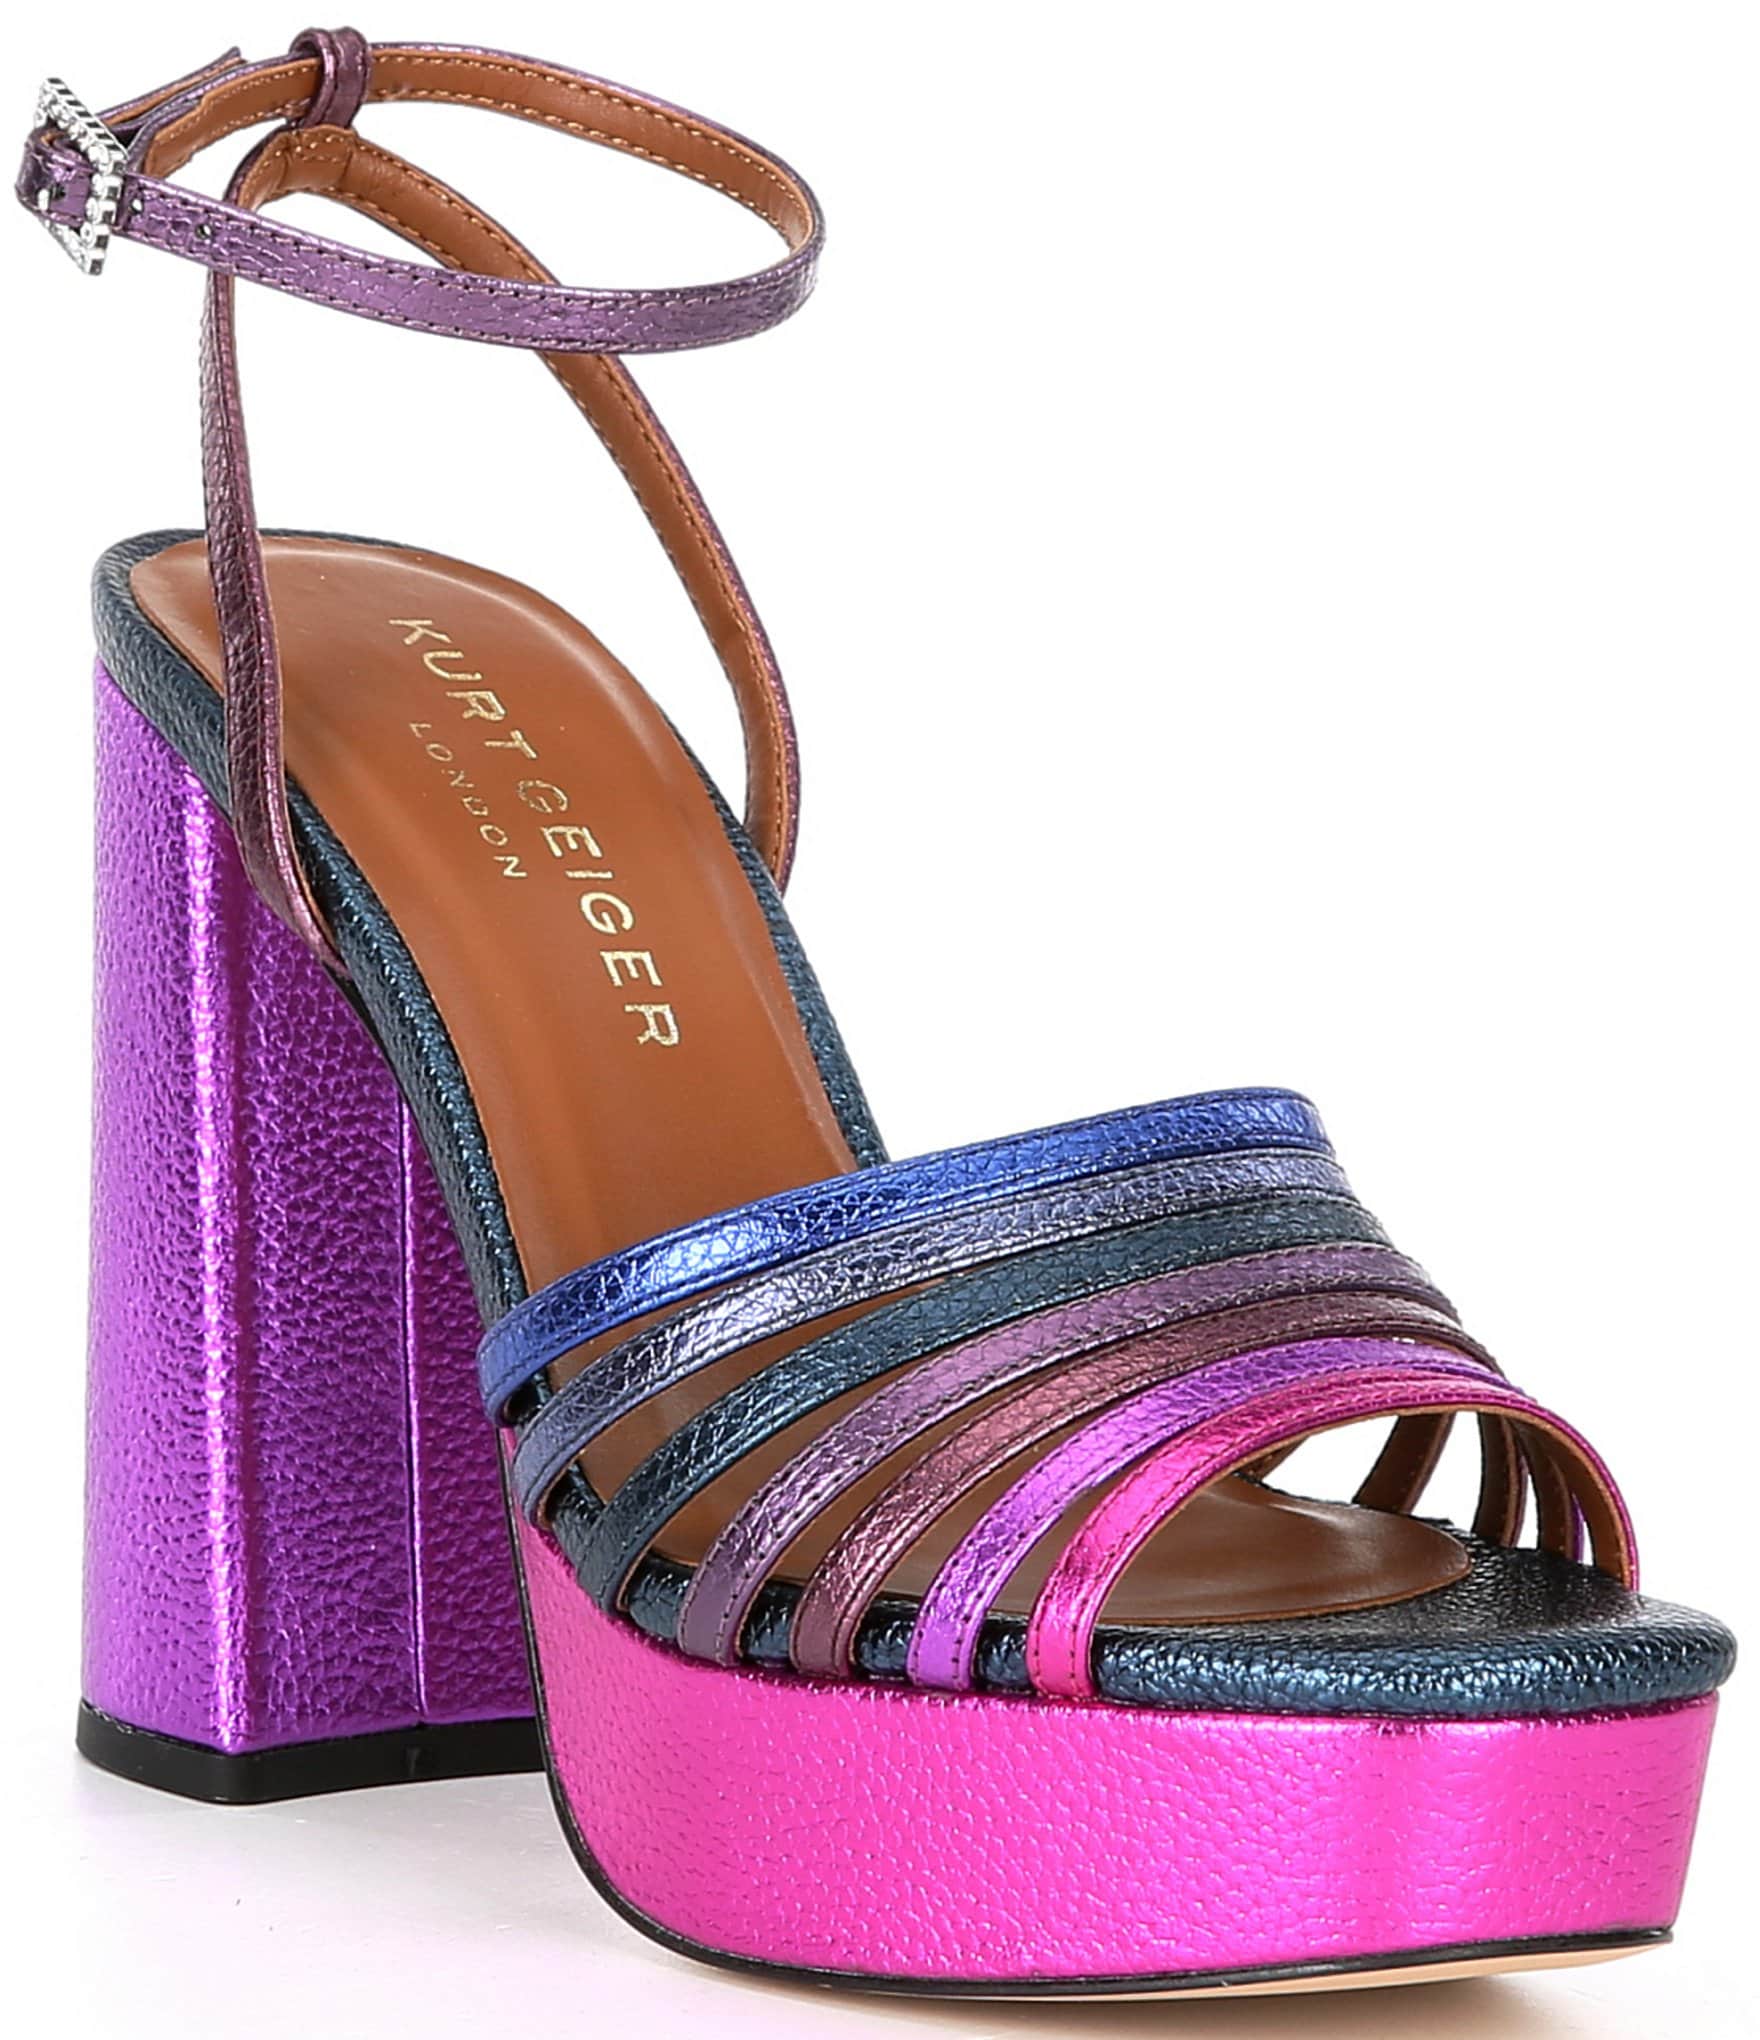  RAYSEEN Premium Colorful Heels for Women - Multicolor Strappy  Heels for Women - Crisscross Square Heels with Chain Strap